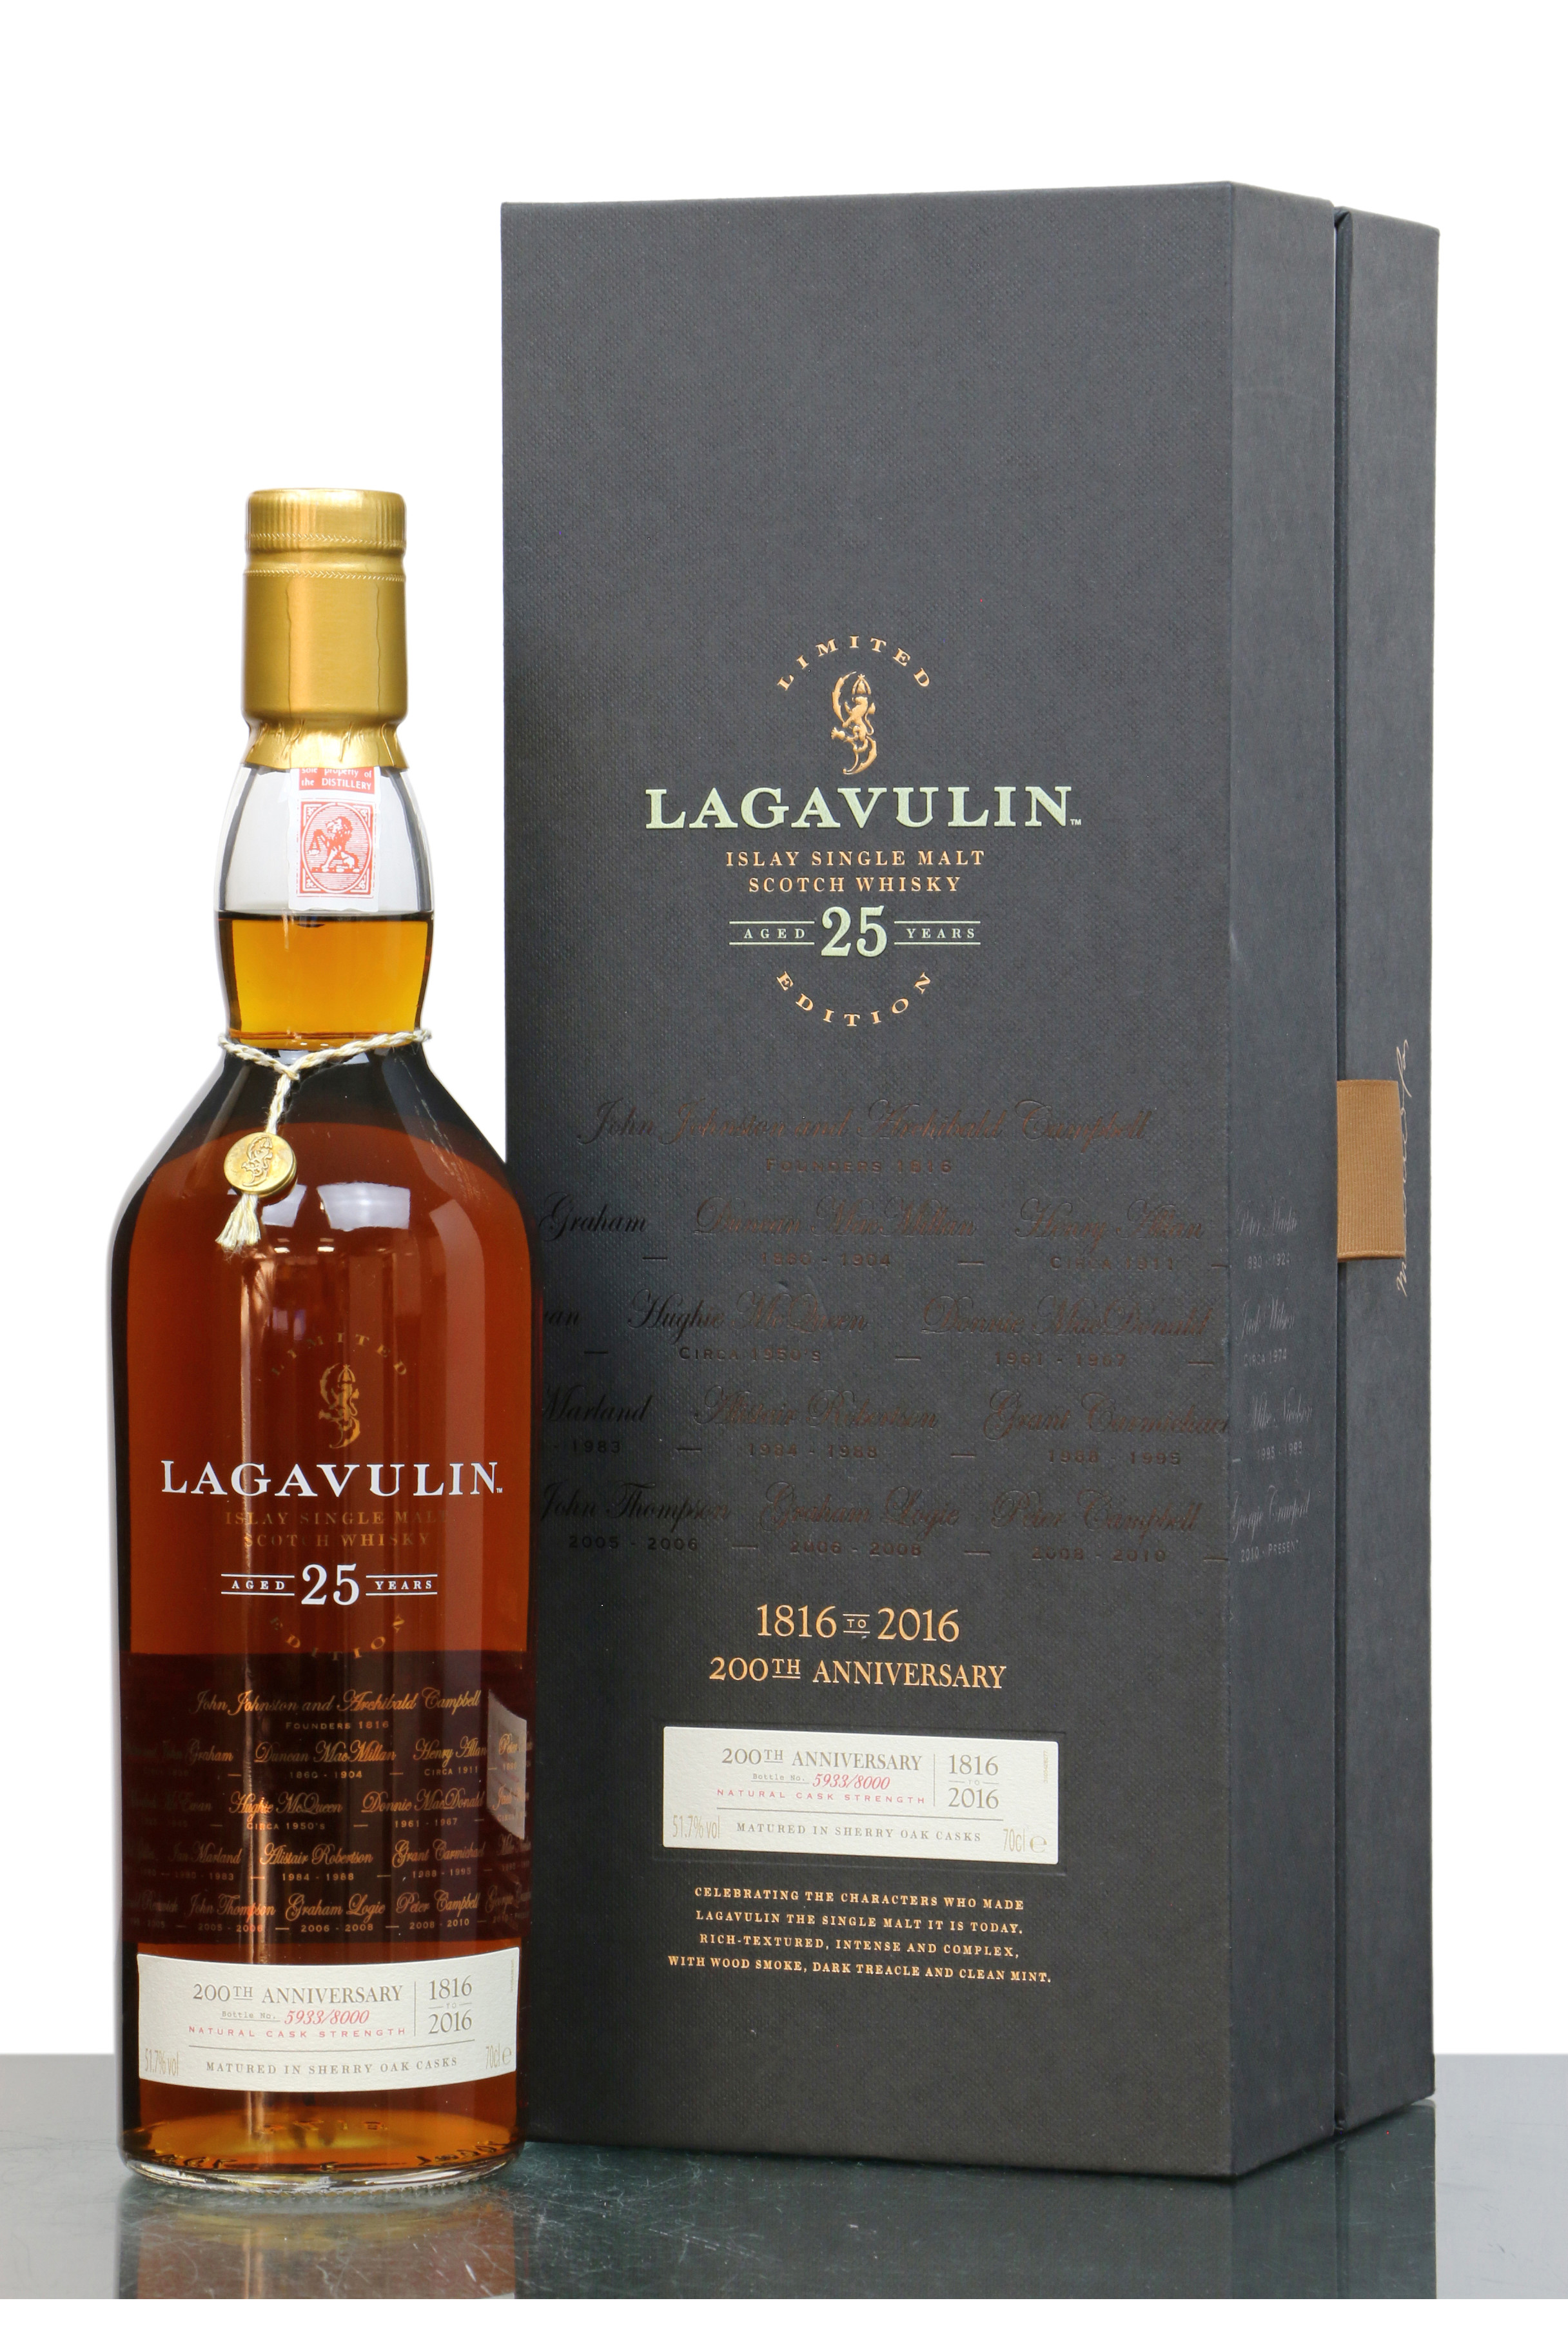 Lagavulin 25 Years Old - 200th Anniversary Limited Edition - Just